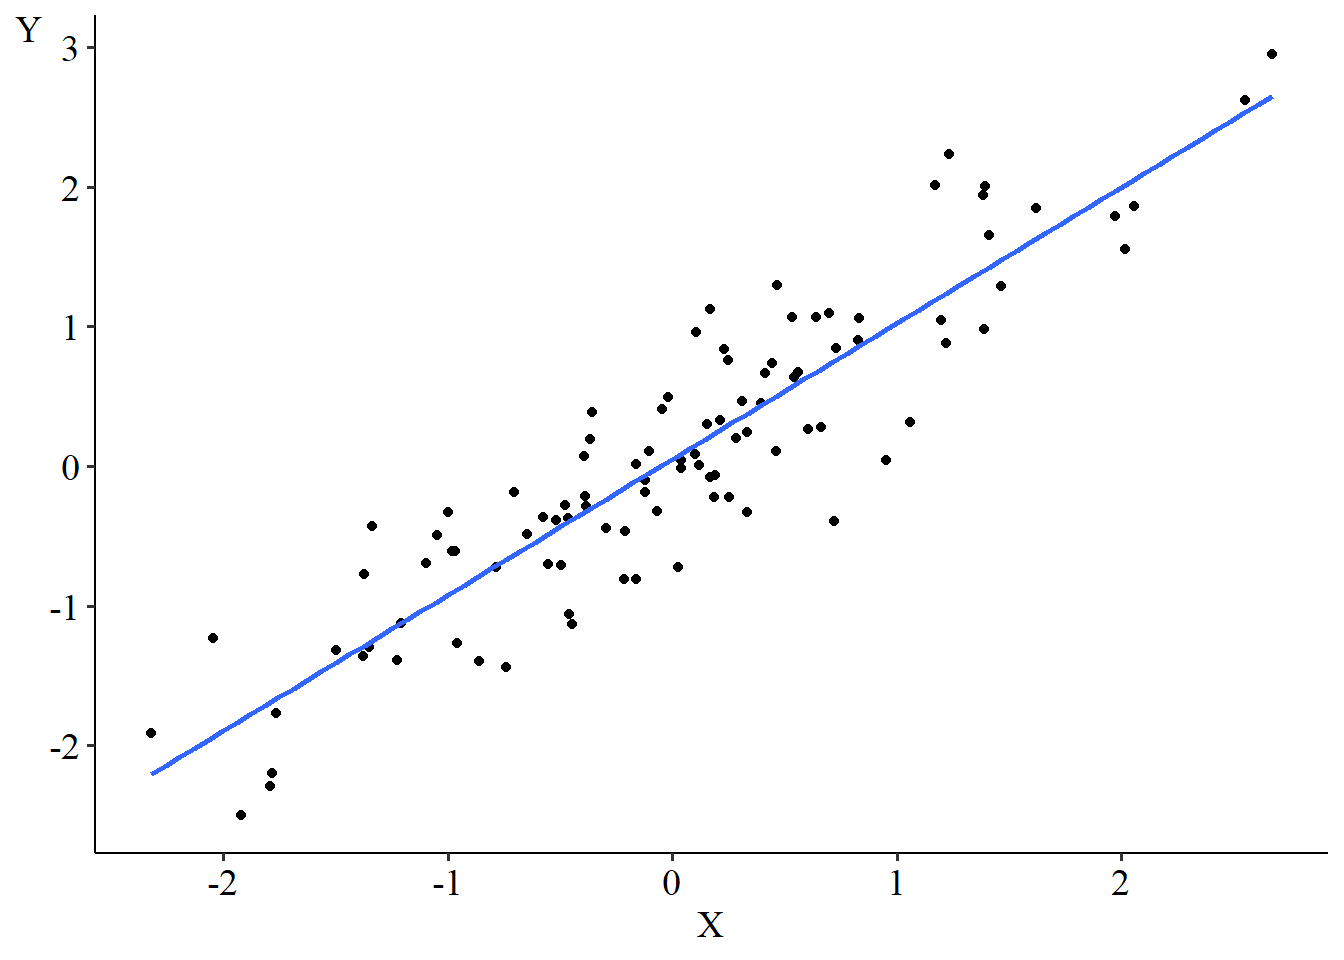 A scatterplot of X vs Y, and a best-fit straight line that looks like it fits the data pretty well.